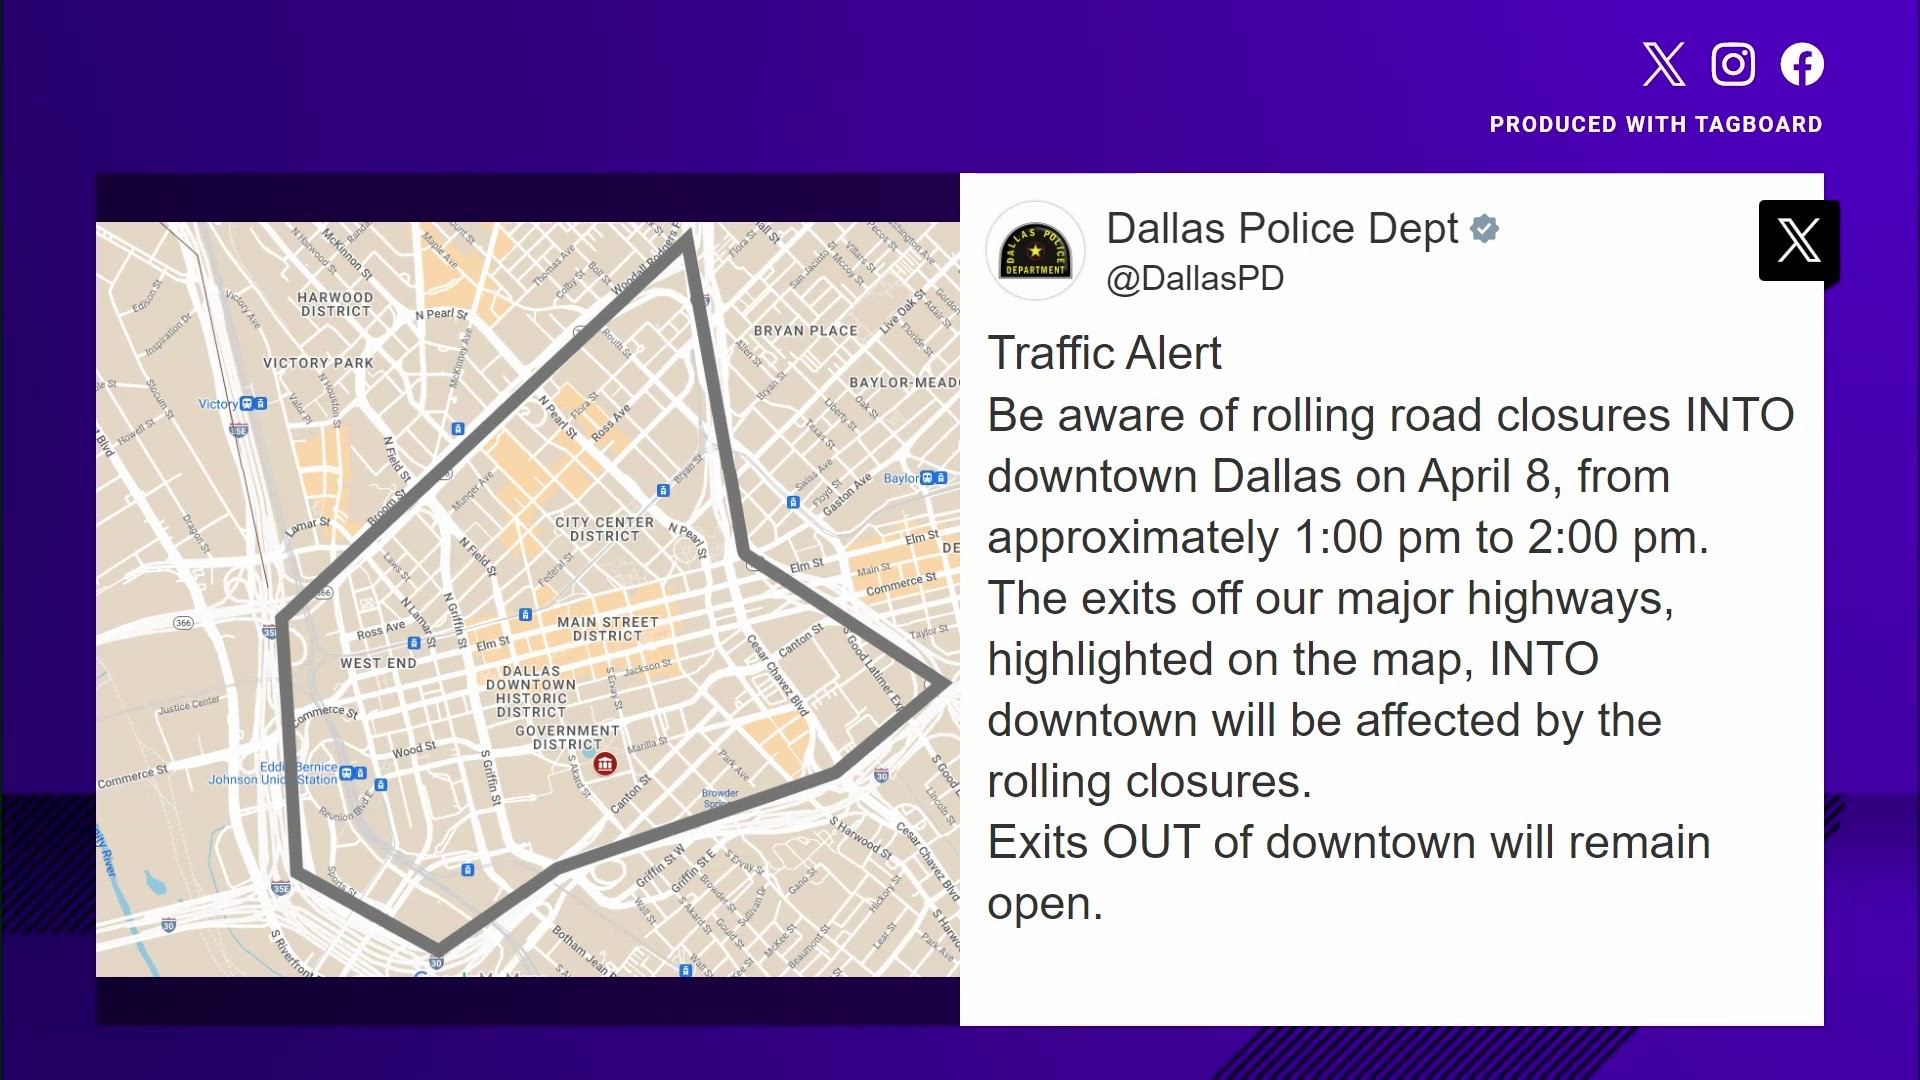 Exits out of downtown Dallas will remain open.